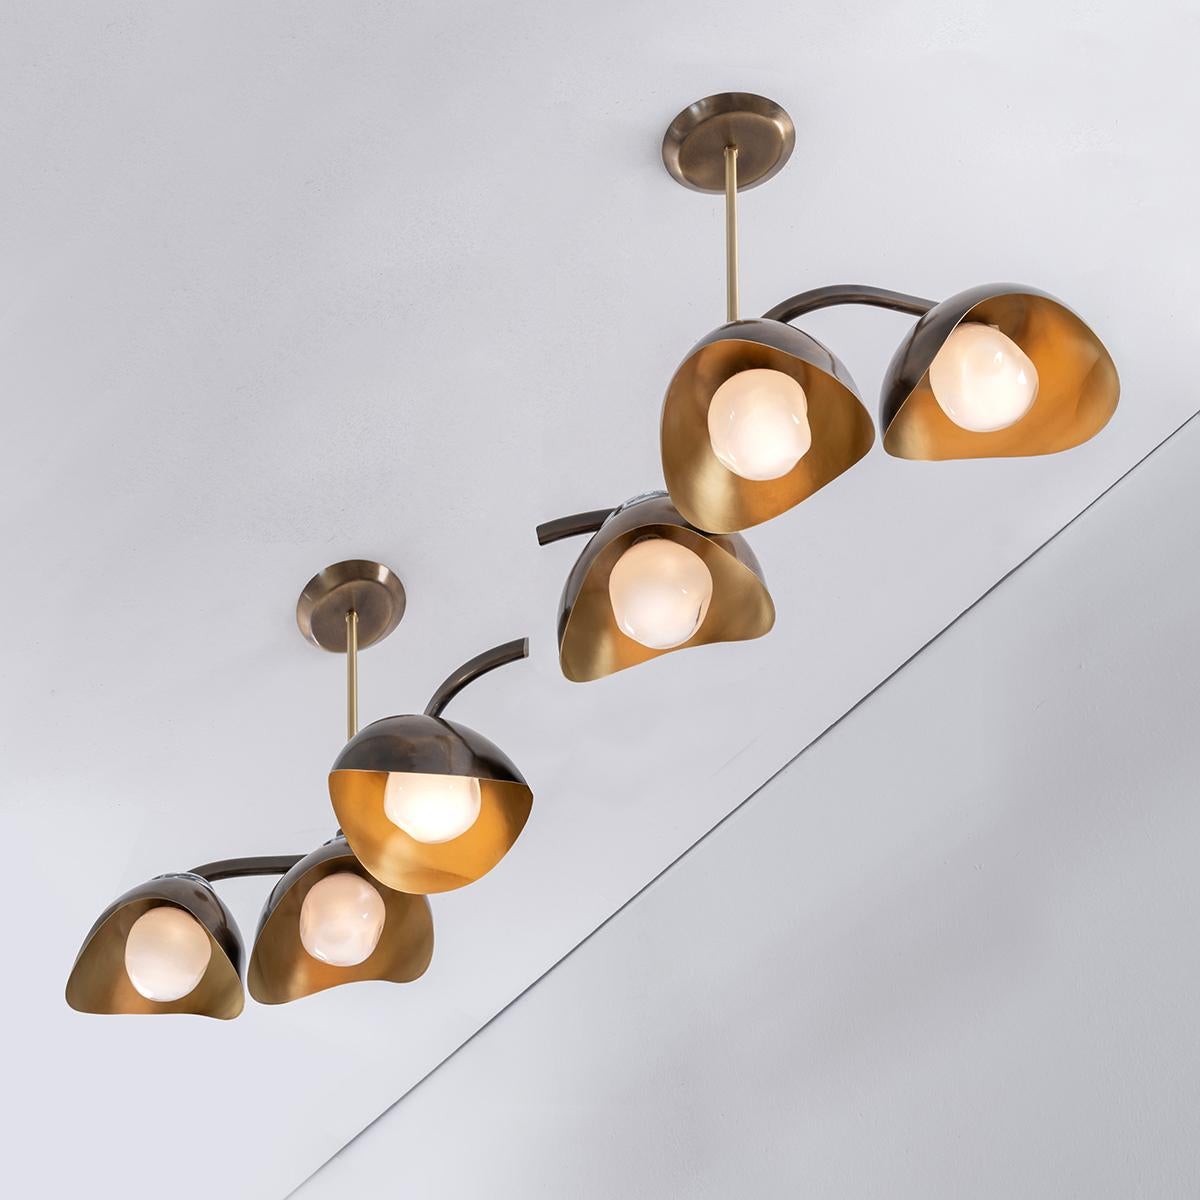 The Serpente Tre ceiling light features a gently winding frame to which are mounted three organic shades. Each shade cradles one of our Sfera glasses on the inside and a clear molded glass on top: both handblown in Murano. Shown in a two-tone